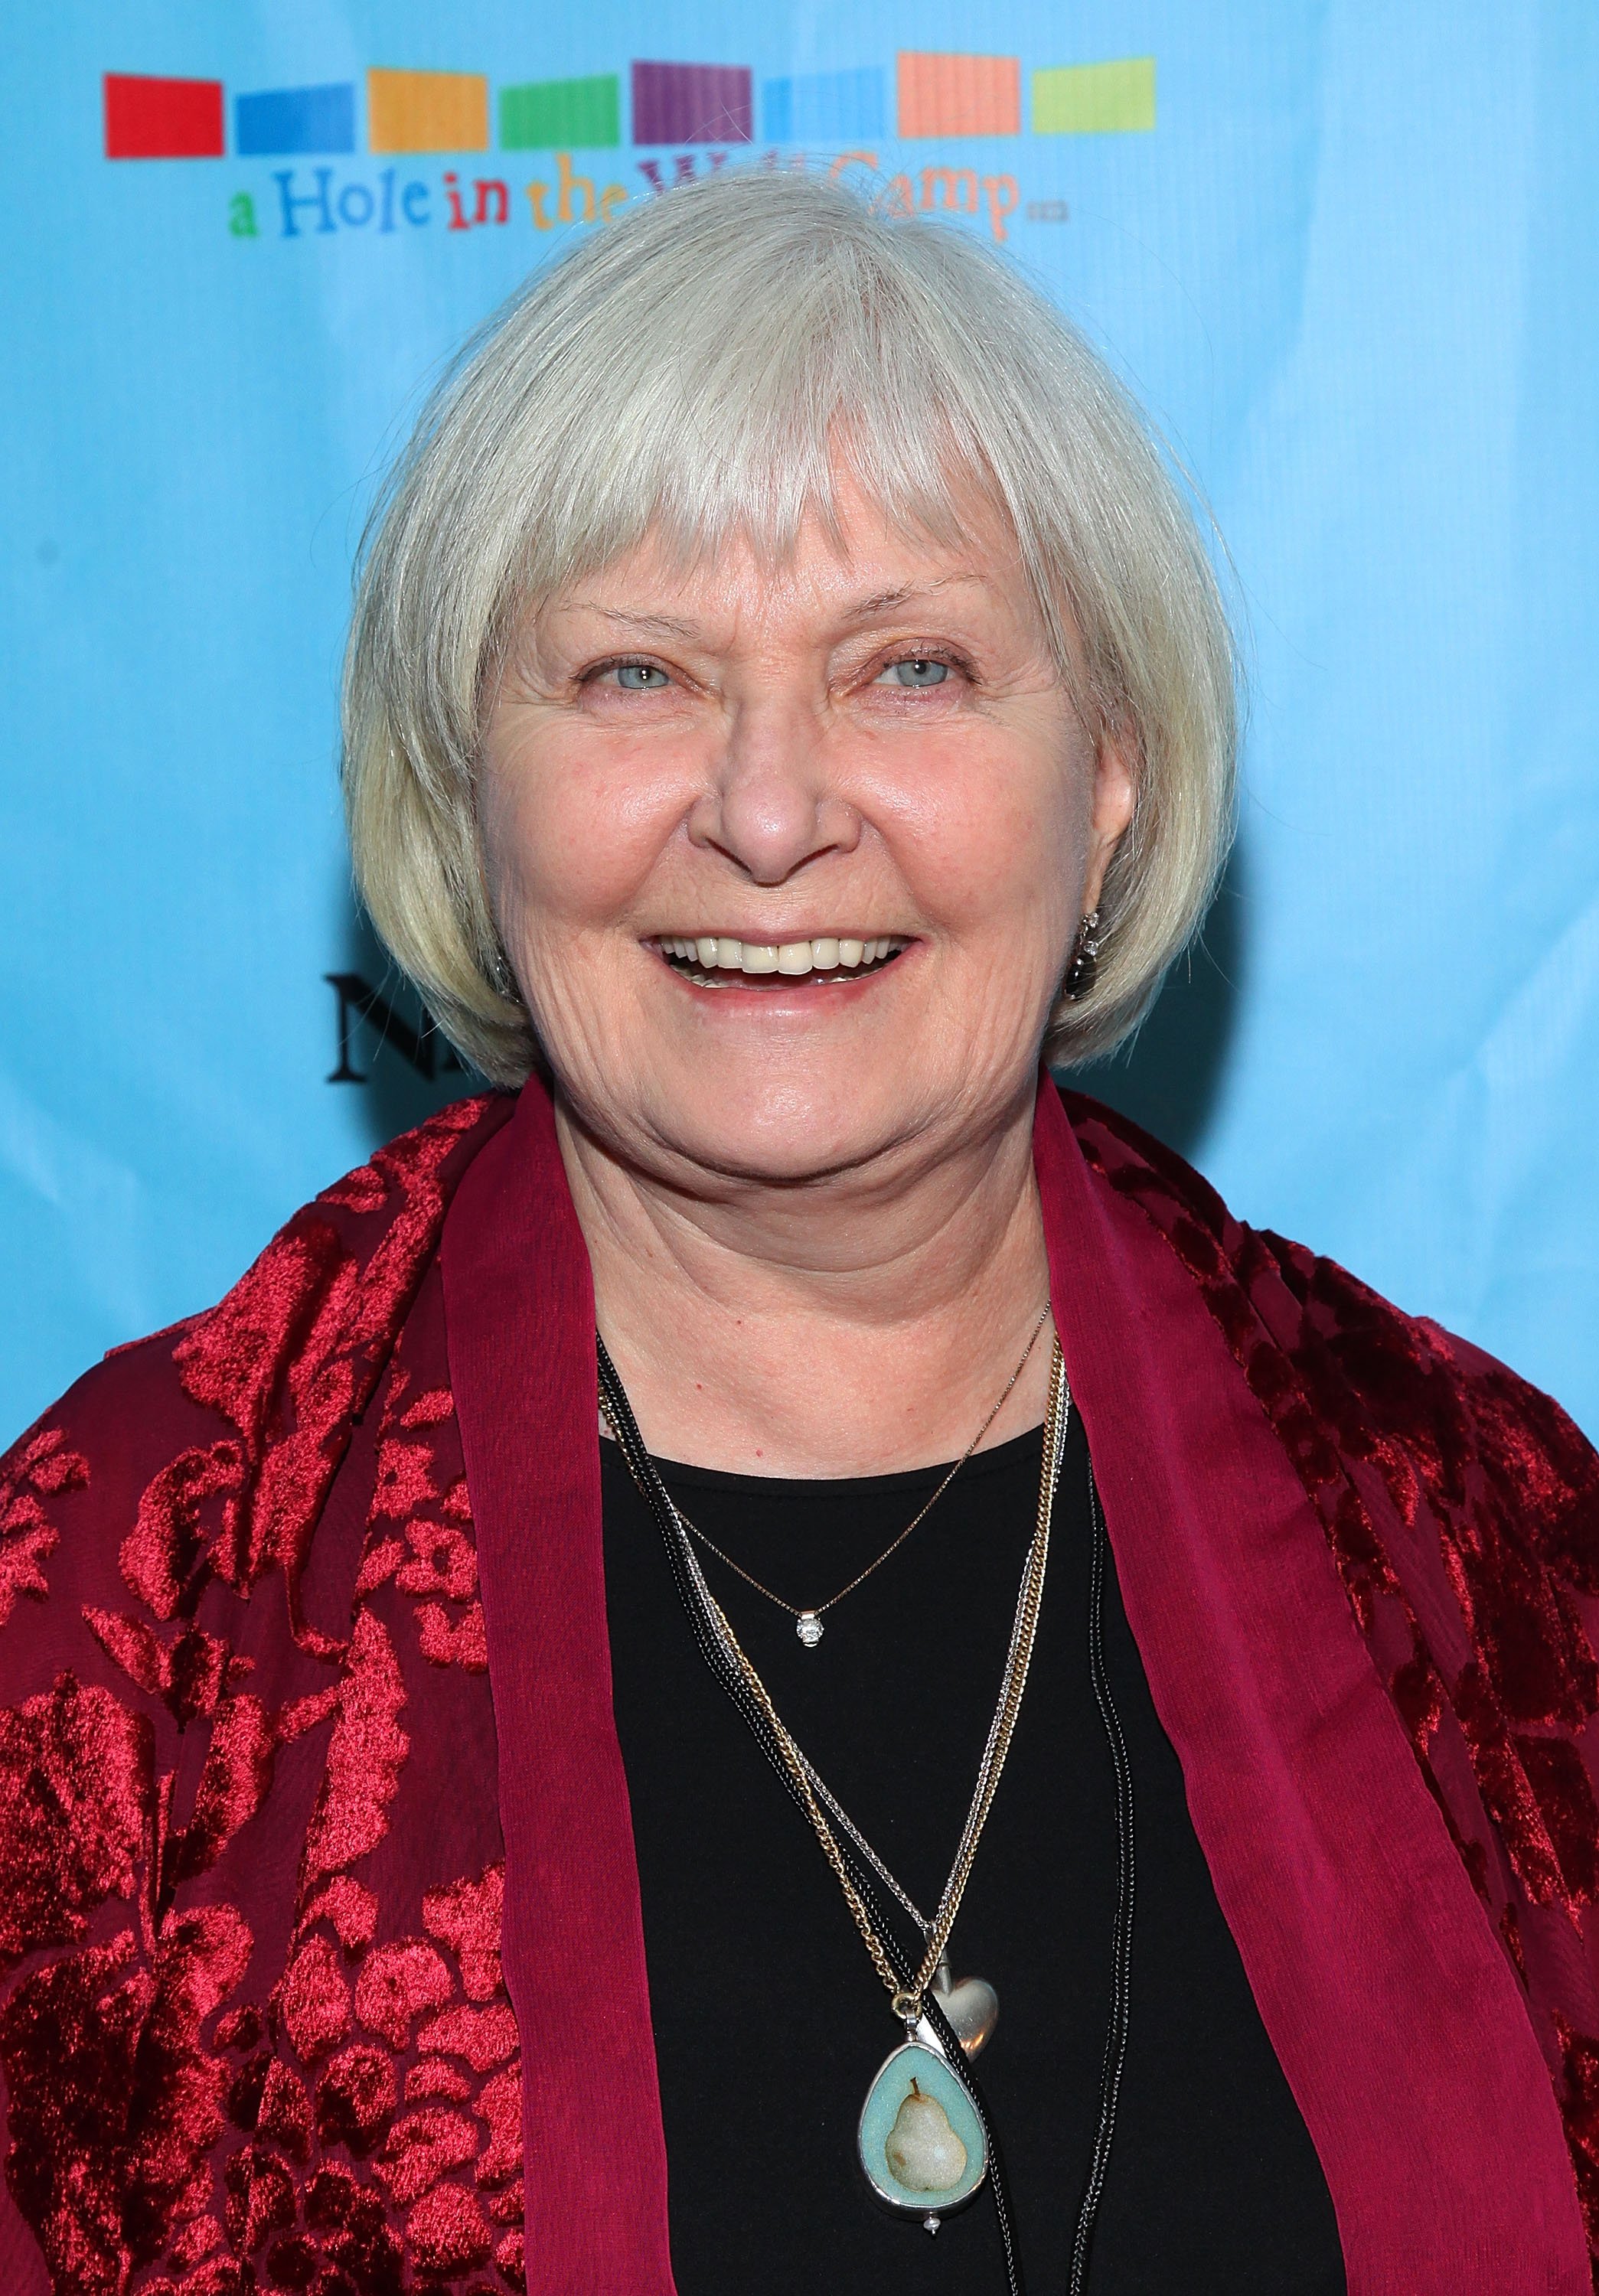 Joanne Woodward at the celebration of Paul Newman's Hole in the Wall Camps on October 21, 2010 | Source: Getty Images